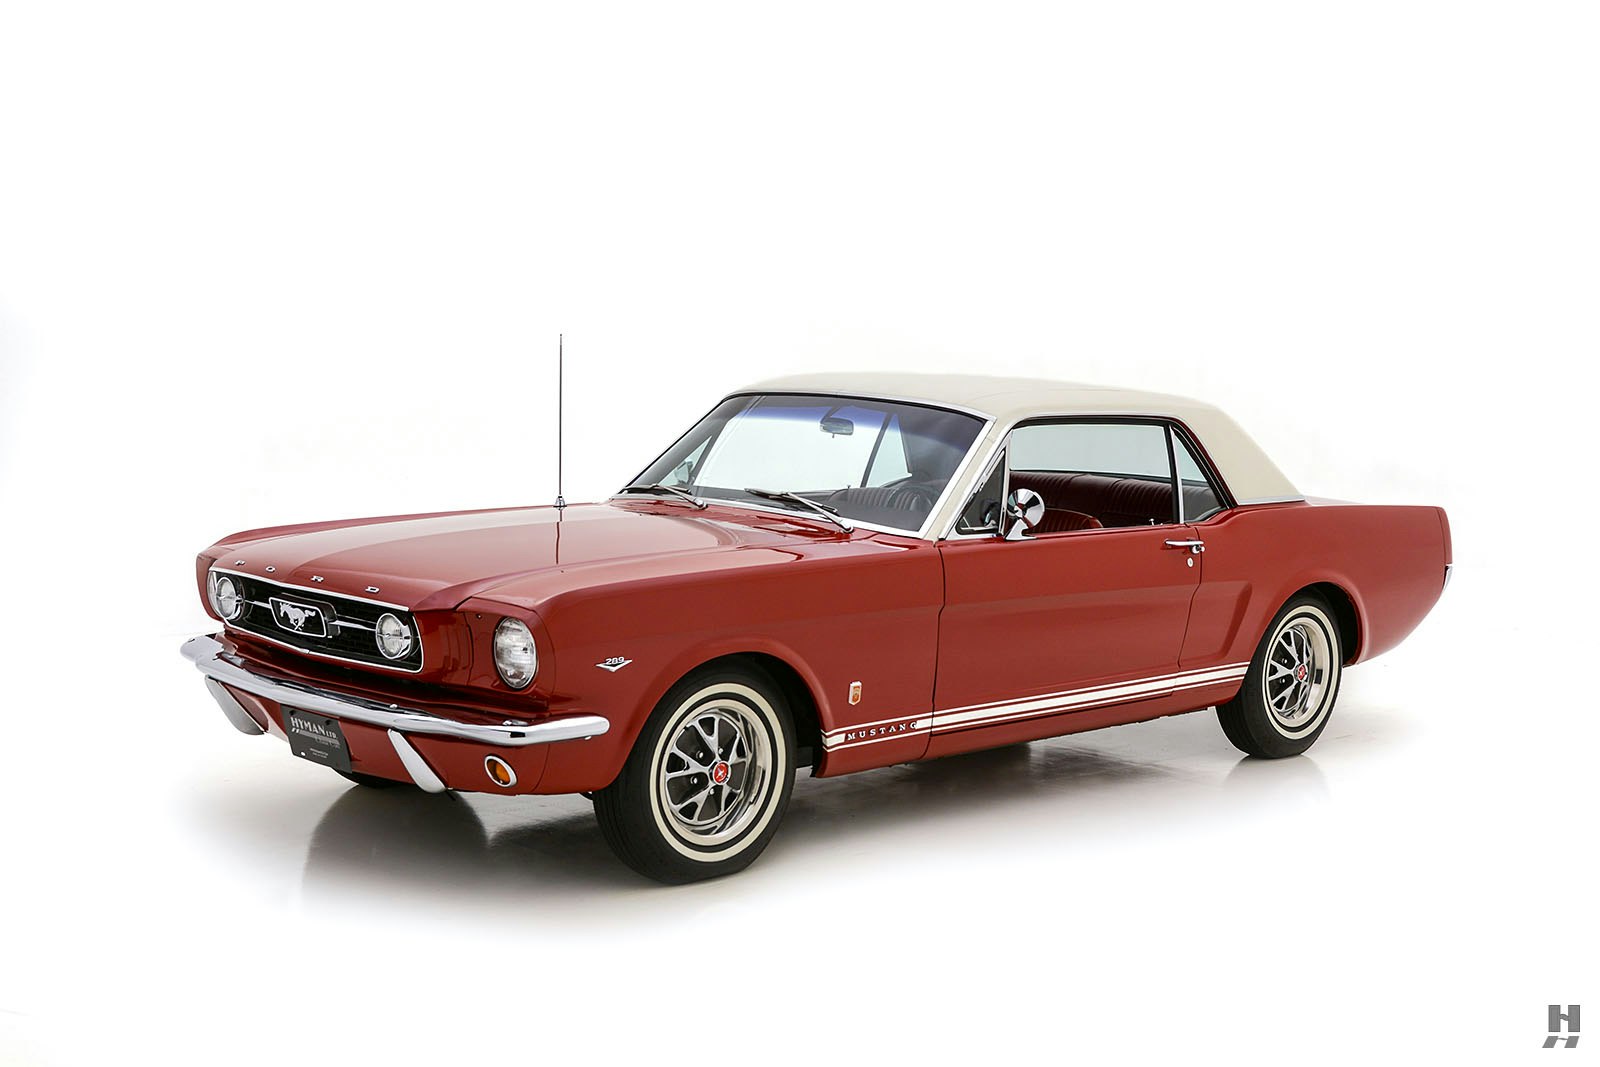 1966 Ford Mustang GT 2dr Coupe Courtesy of Hyman Ltd.